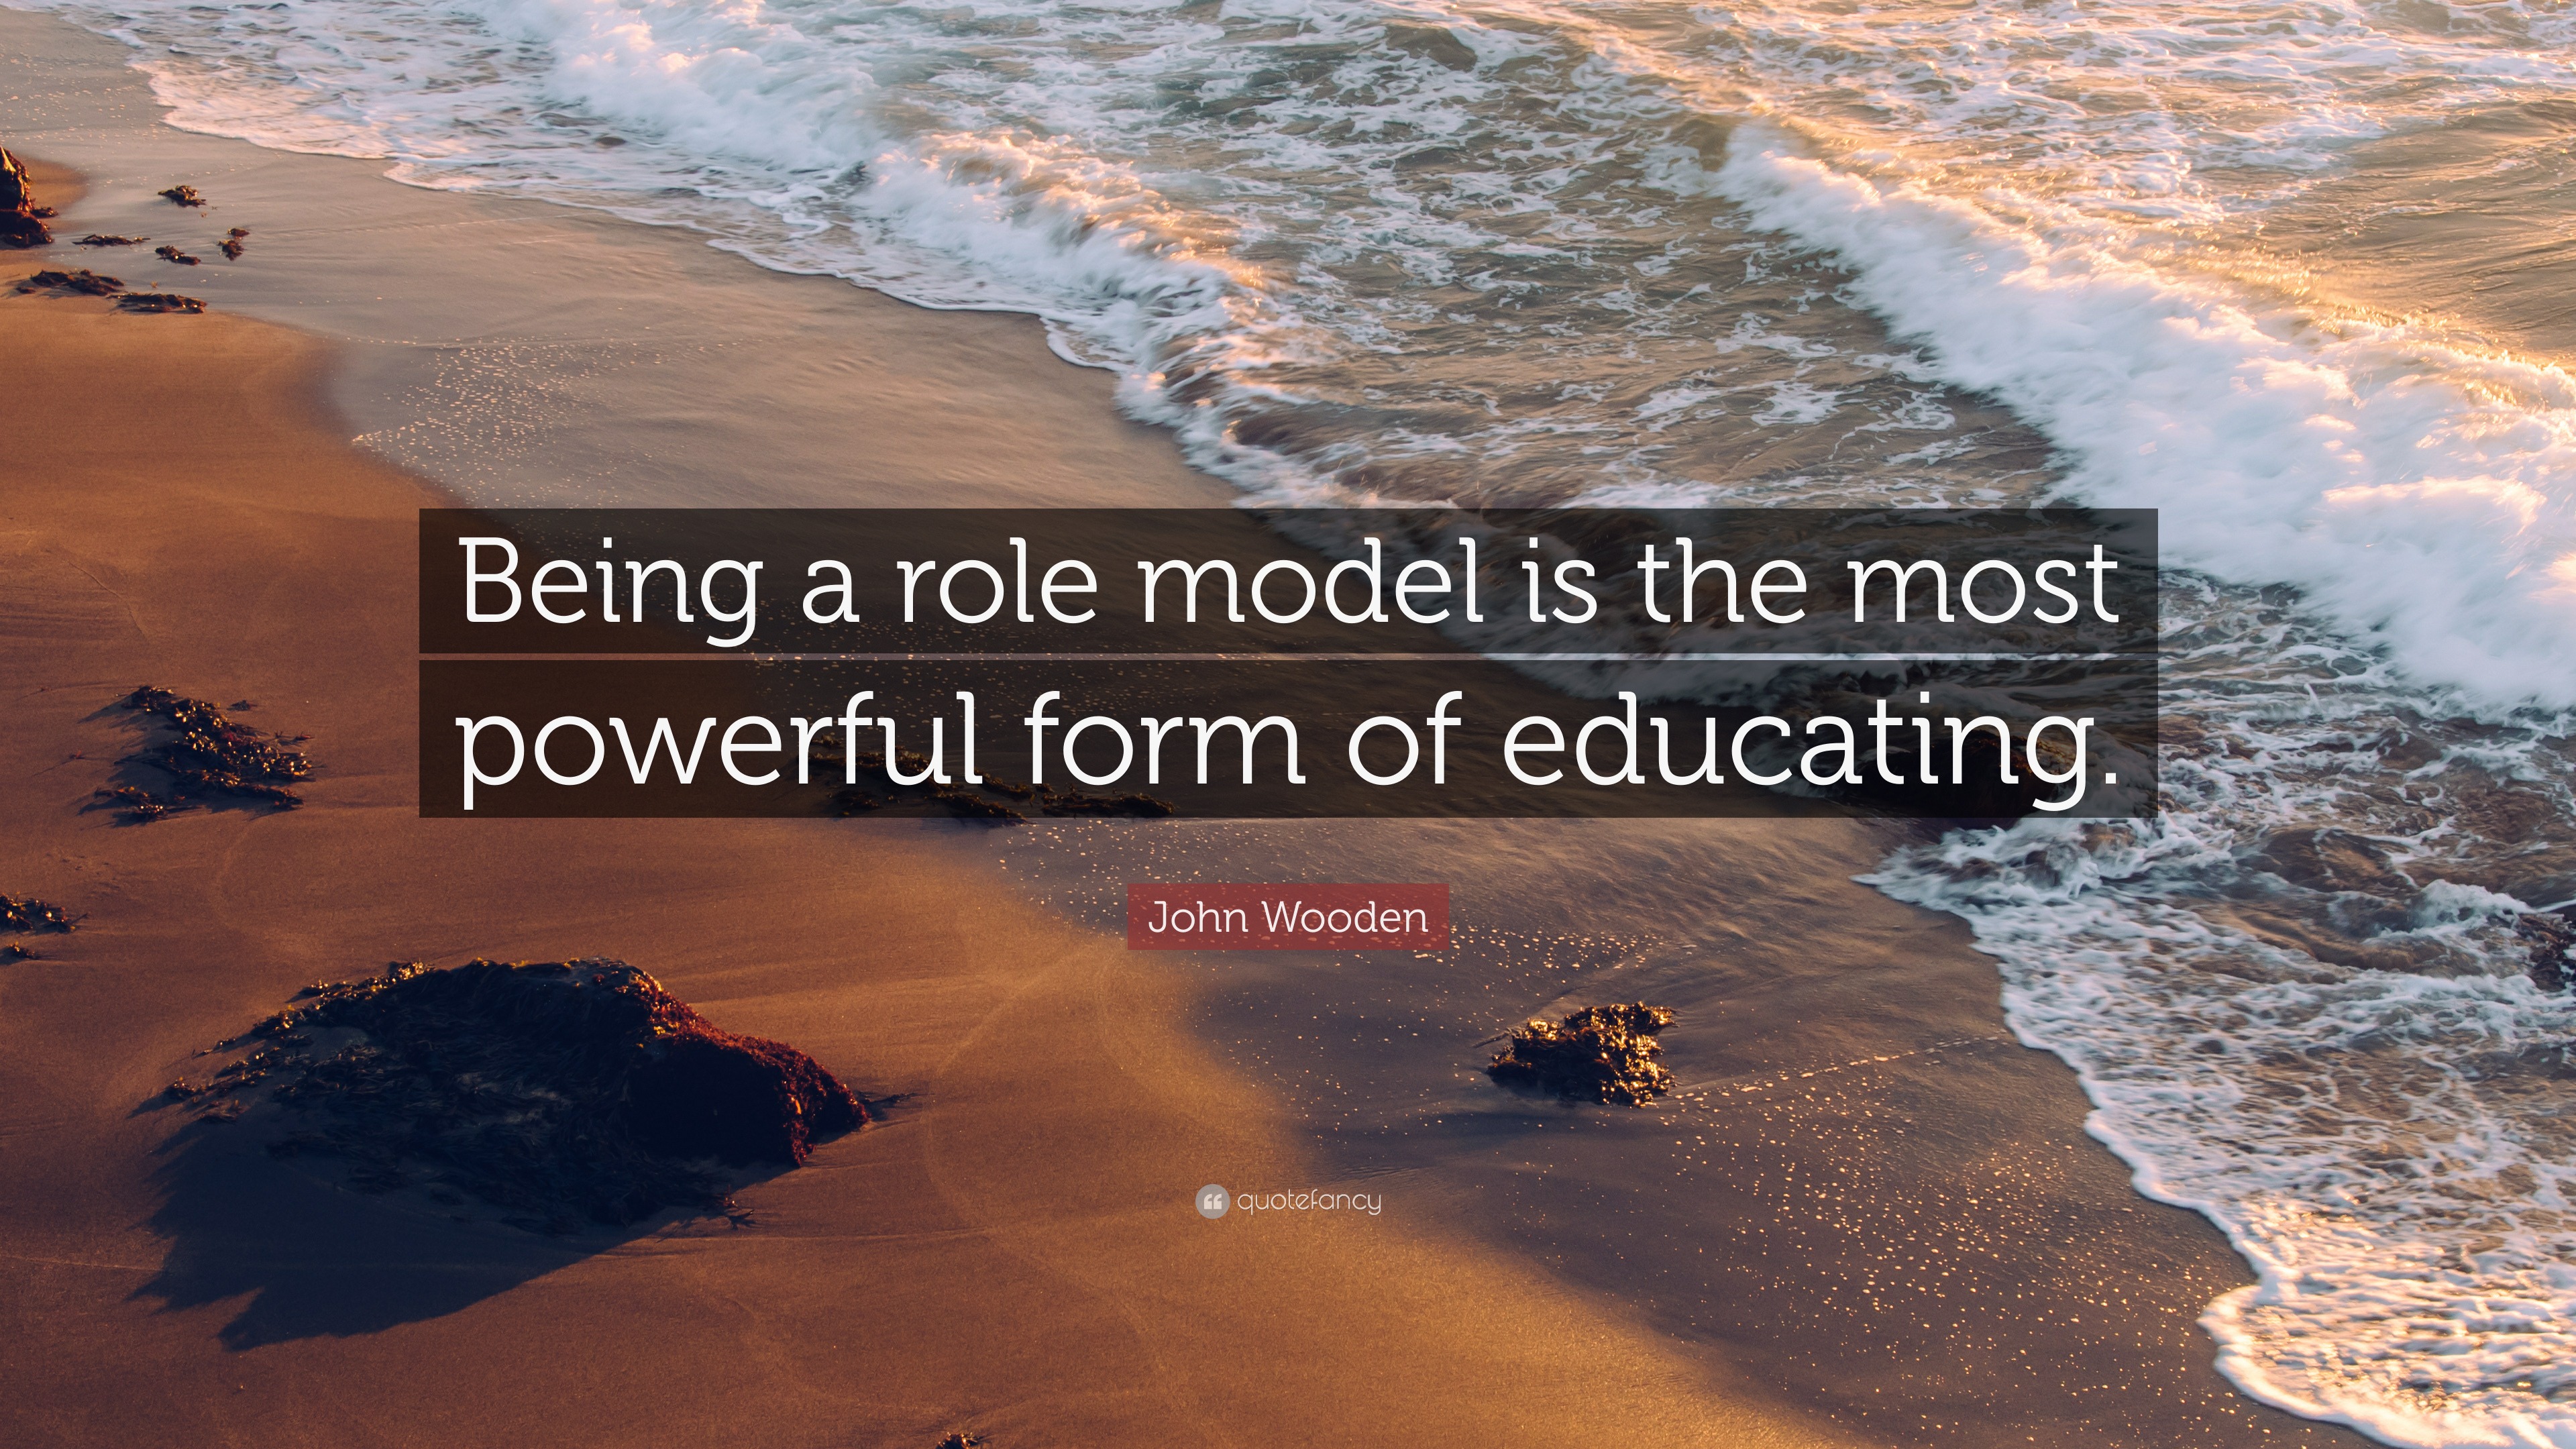 John Wooden Quote: “Being a role model is the most powerful form of